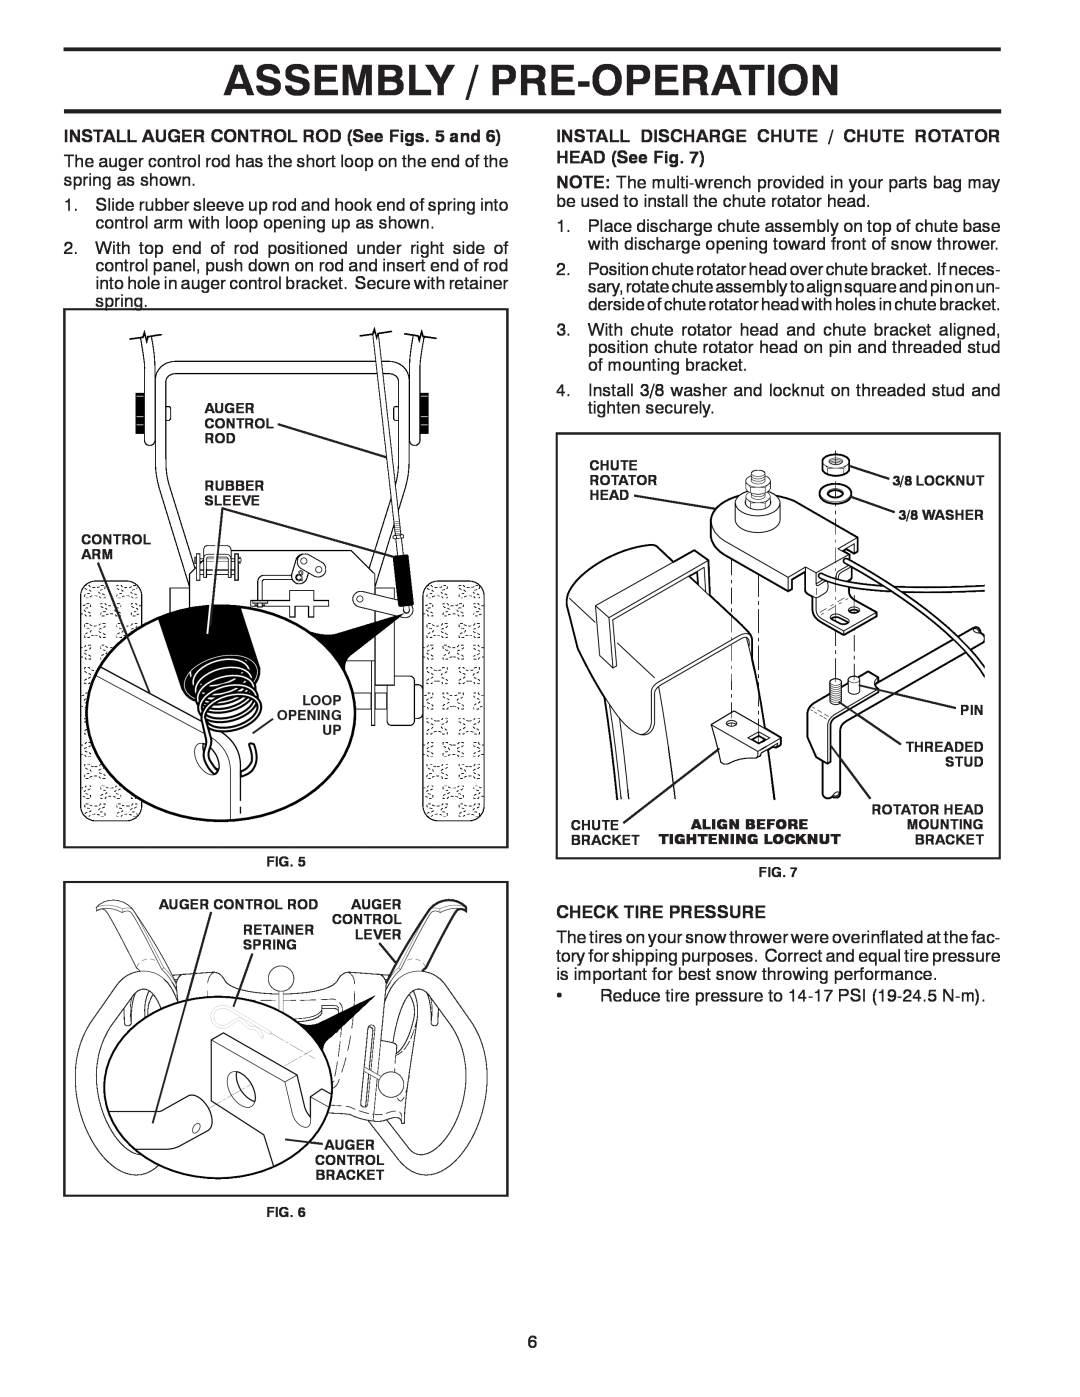 Poulan 416810 owner manual Assembly / Pre-Operation, INSTALL AUGER CONTROL ROD See Figs. 5 and, Check Tire Pressure 